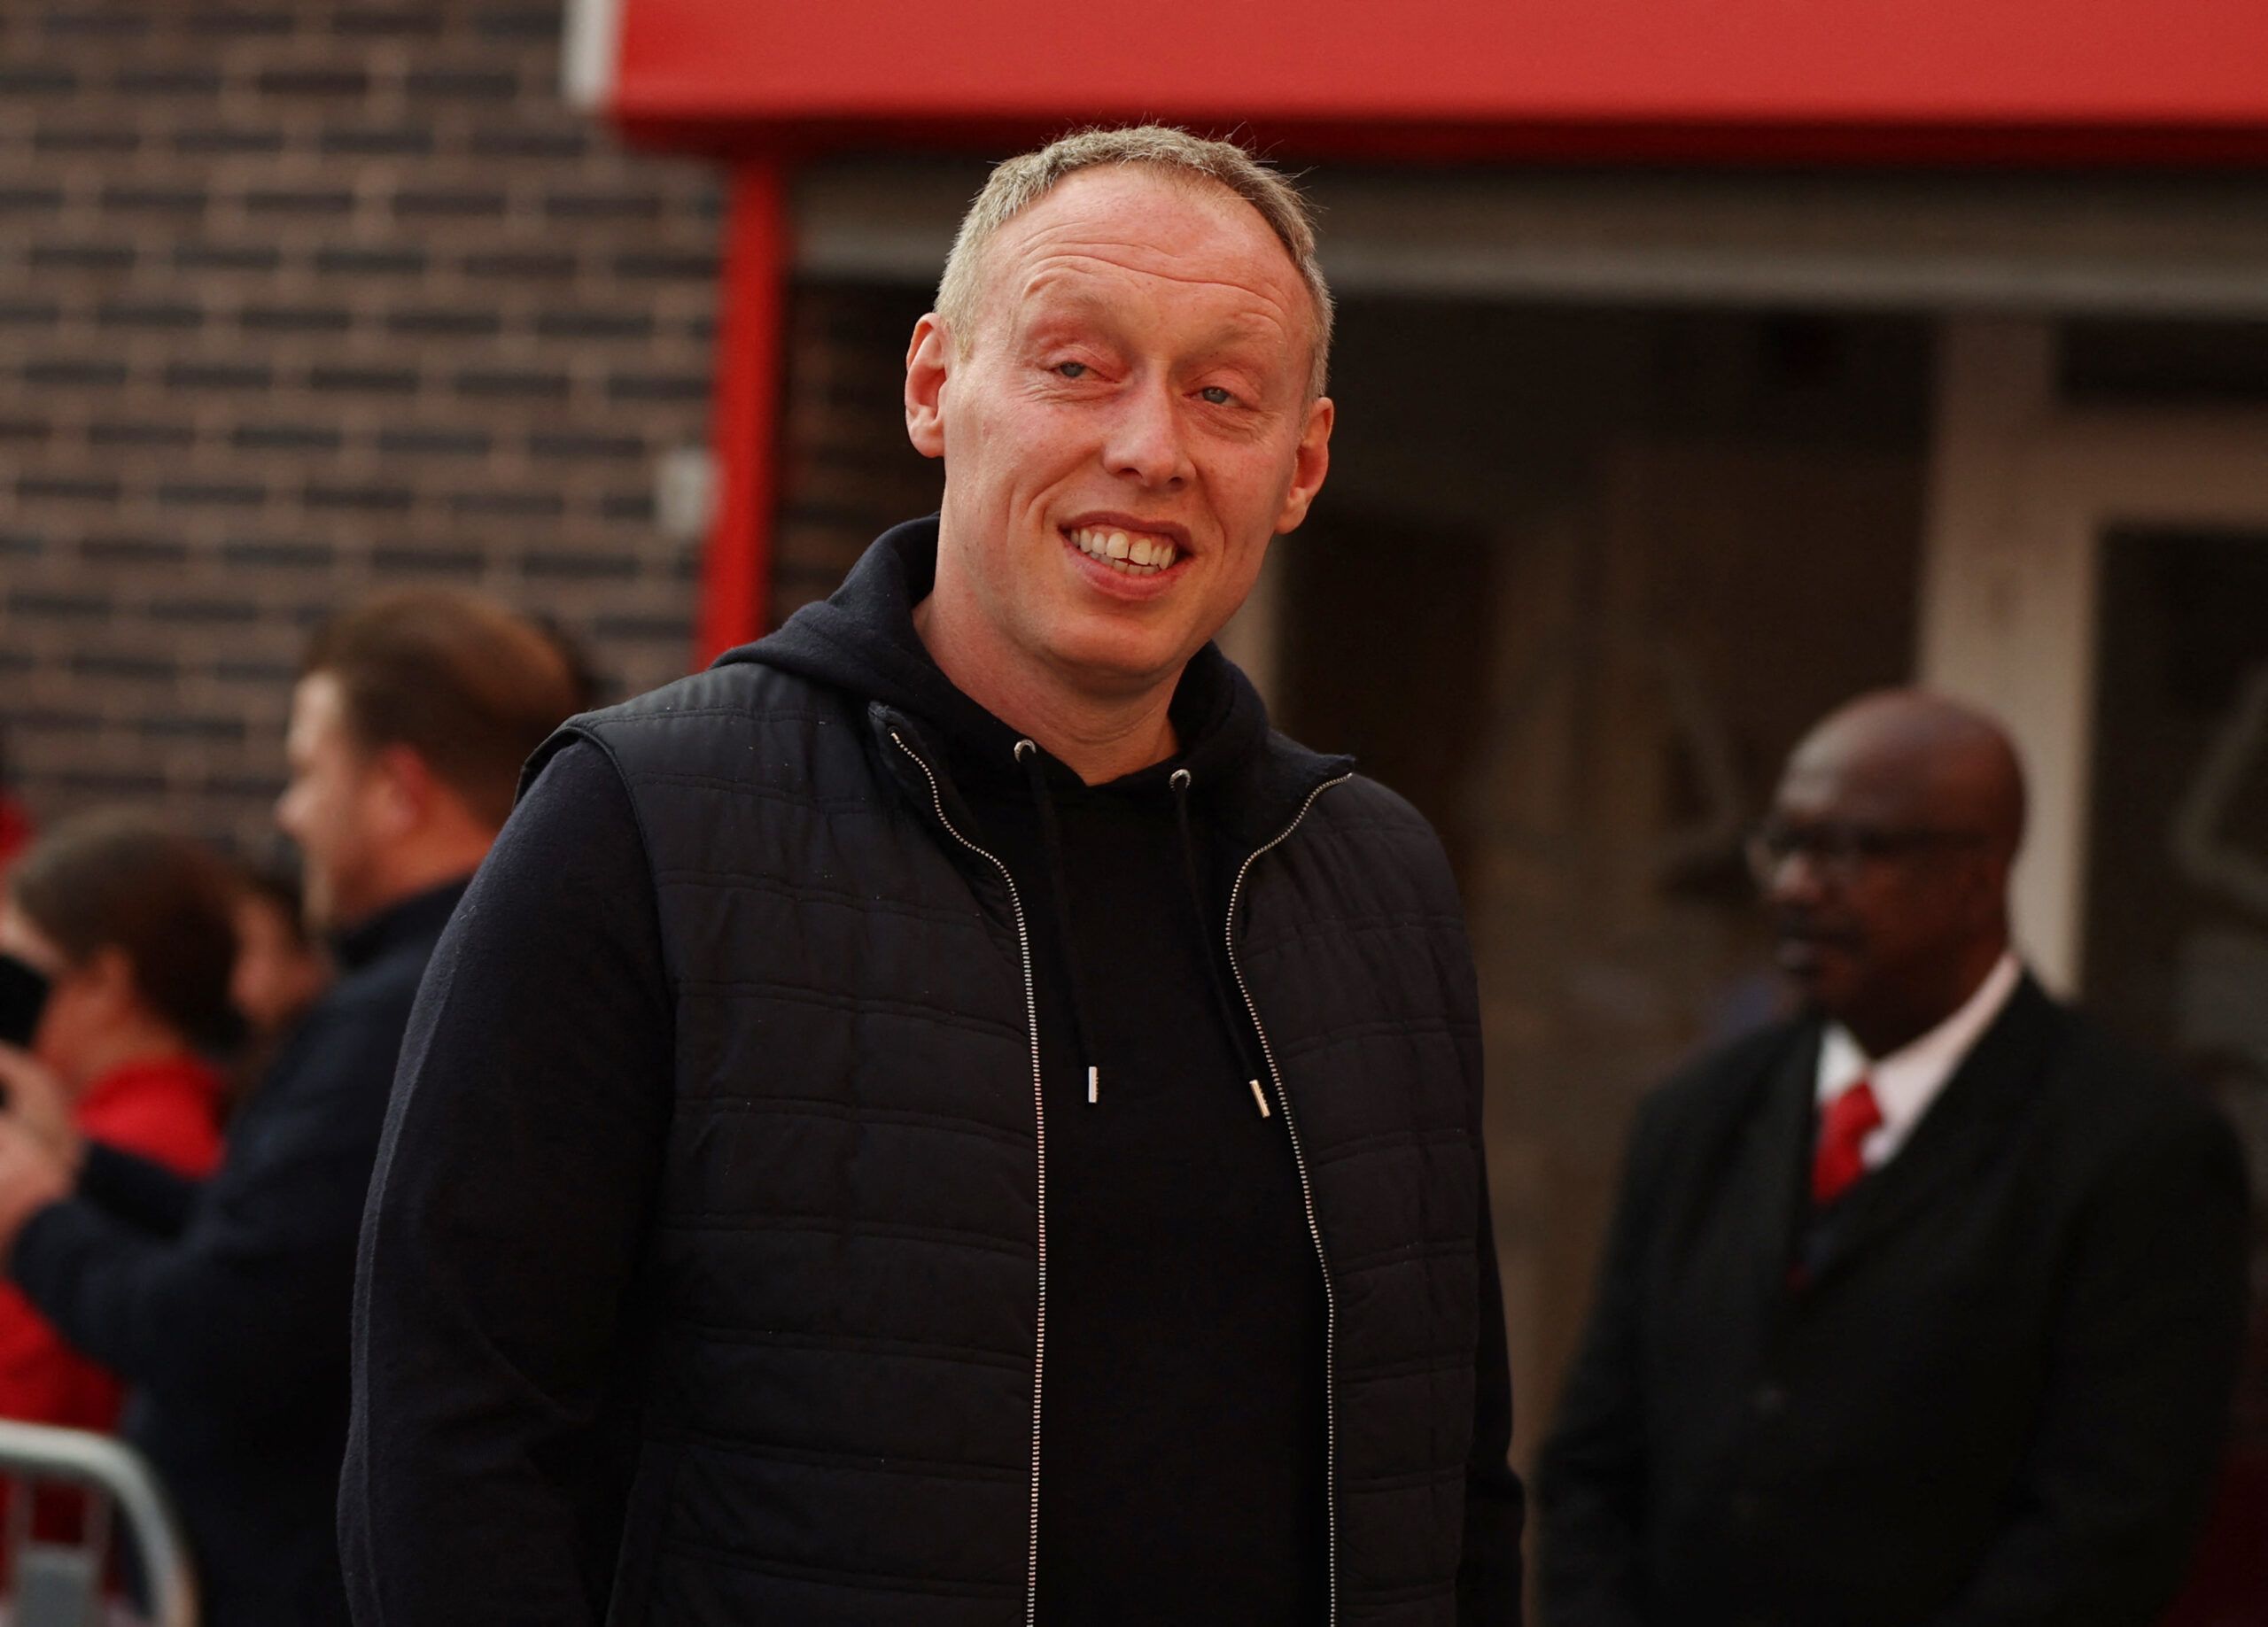 Soccer Football - FA Cup Quarter Final - Nottingham Forest v Liverpool - The City Ground, Nottingham, Britain - March 20, 2022 Nottingham Forest manager Steve Cooper is seen before the match REUTERS/Molly Darlington